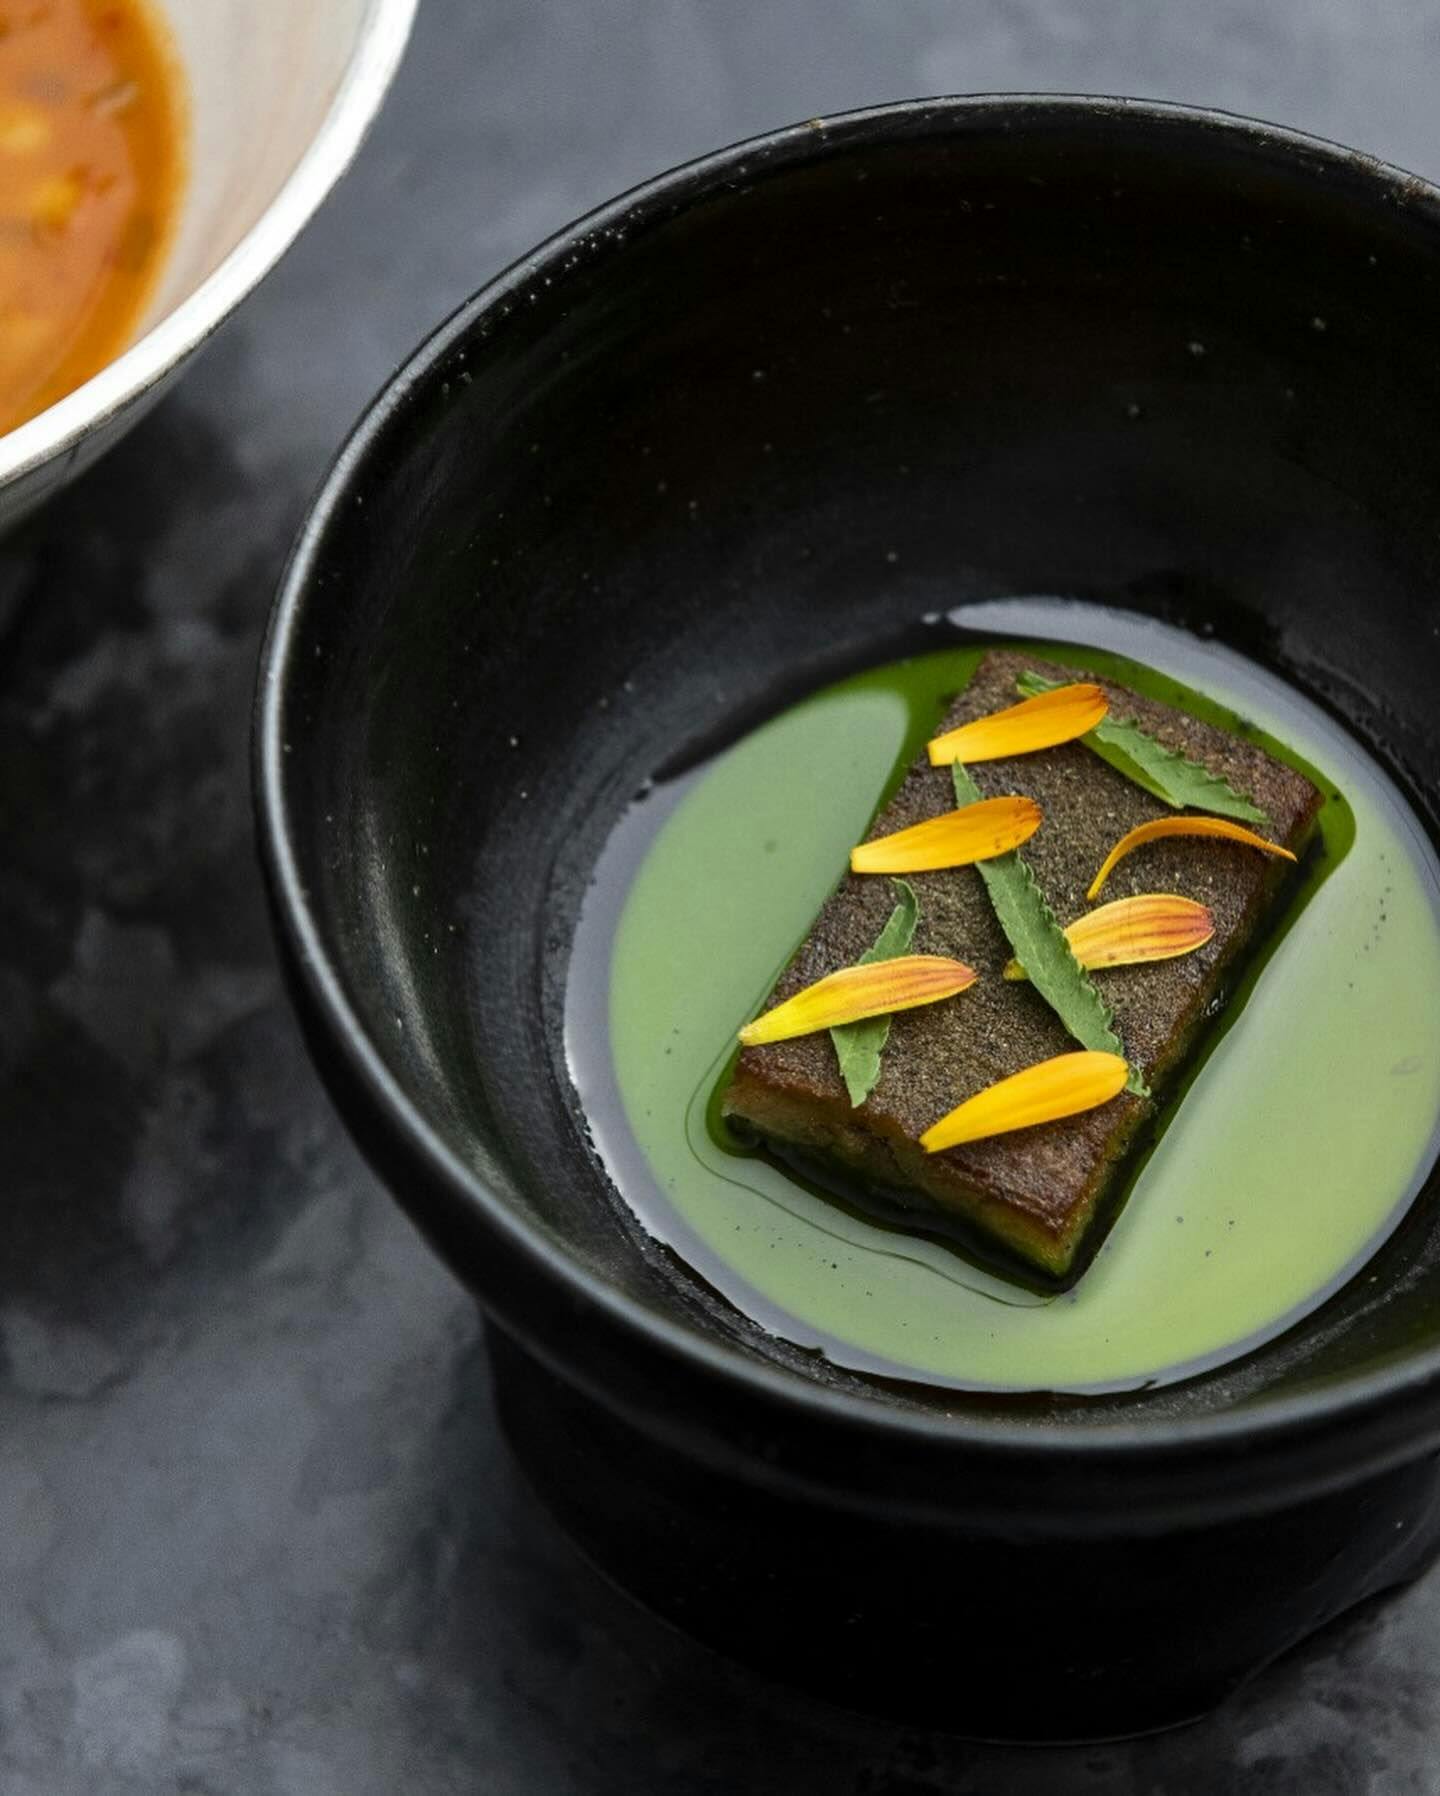 A modern artistic dessert with matcha flavors, presented on a sleek black dish and garnished with vibrant orange petals and green leaves, highlighting the innovative cuisine found in New York’s premier restaurant reservation marketplace.